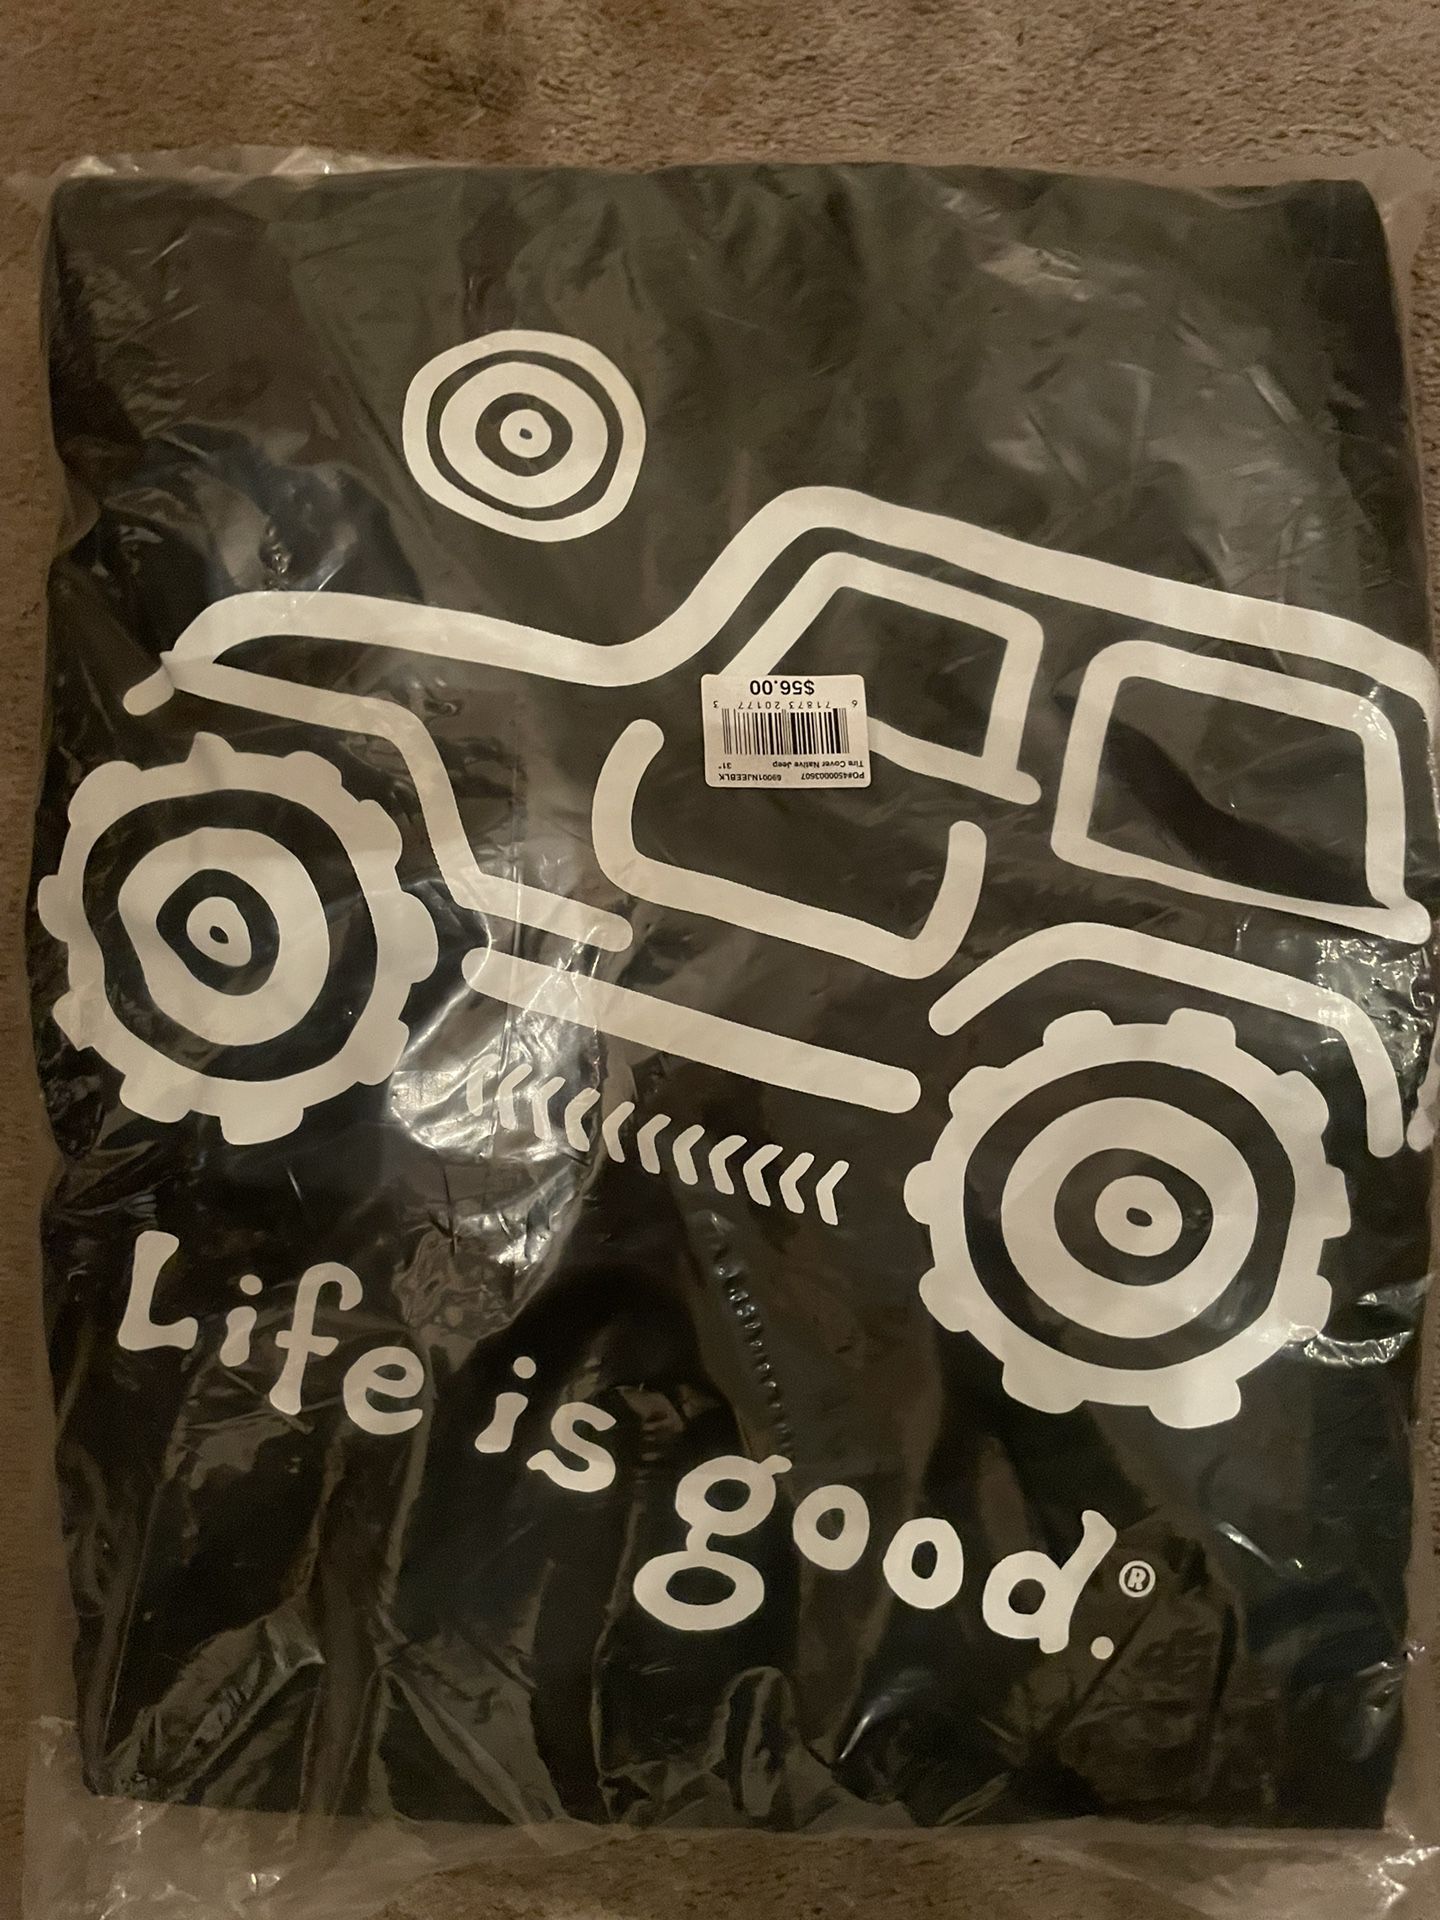 Brand New “Life Is Good” Jeep Tire Cover.